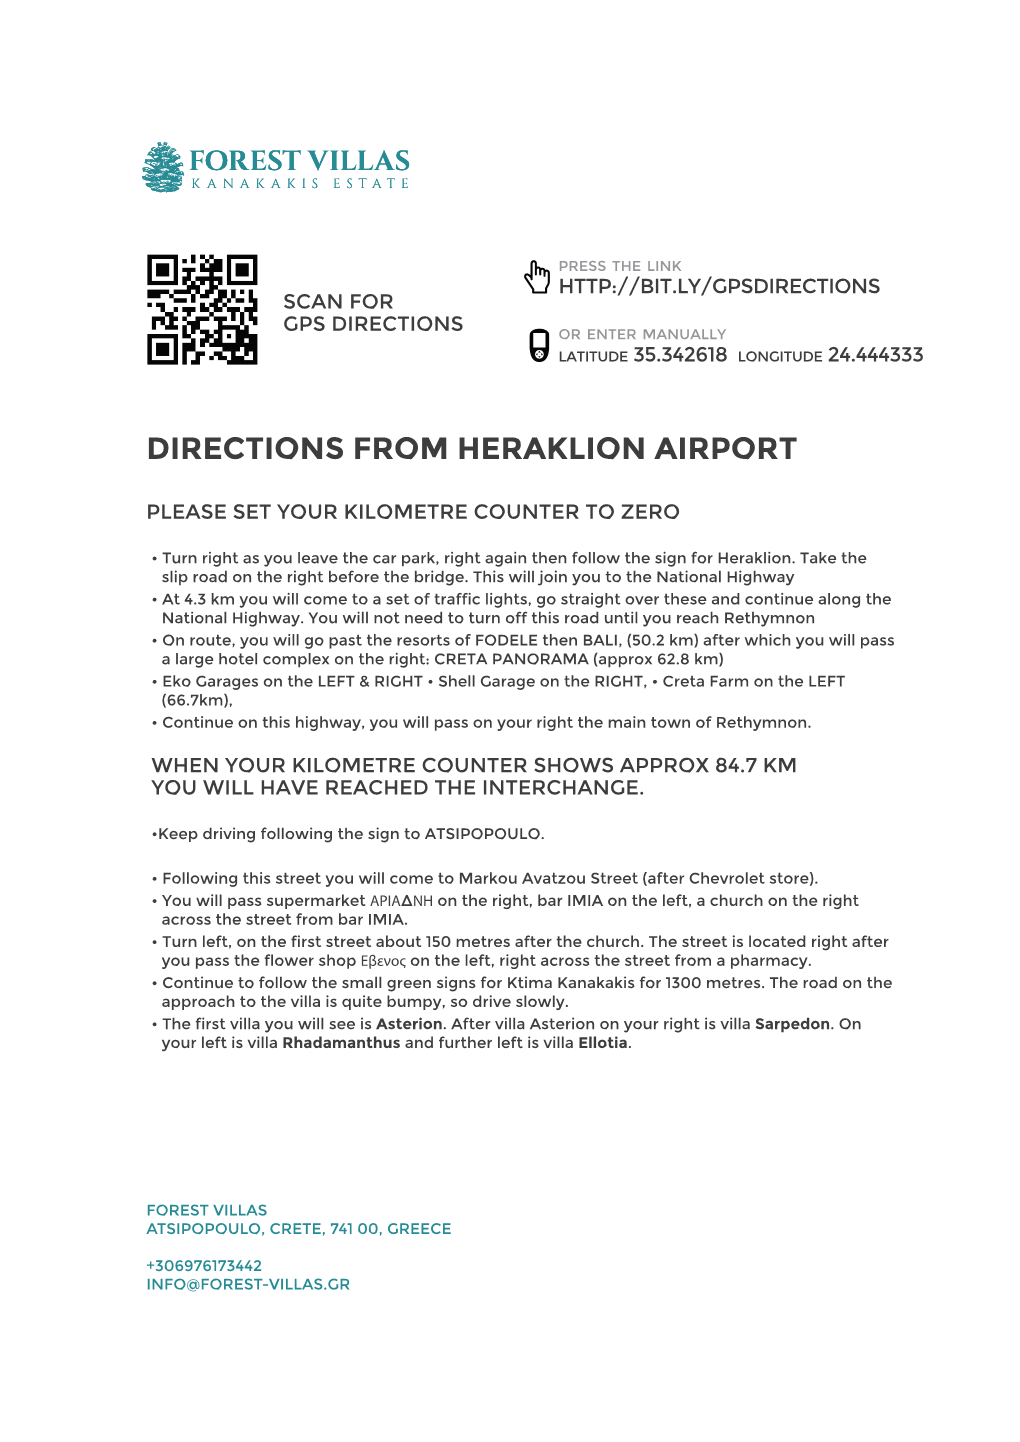 Directions from Heraklion Airport